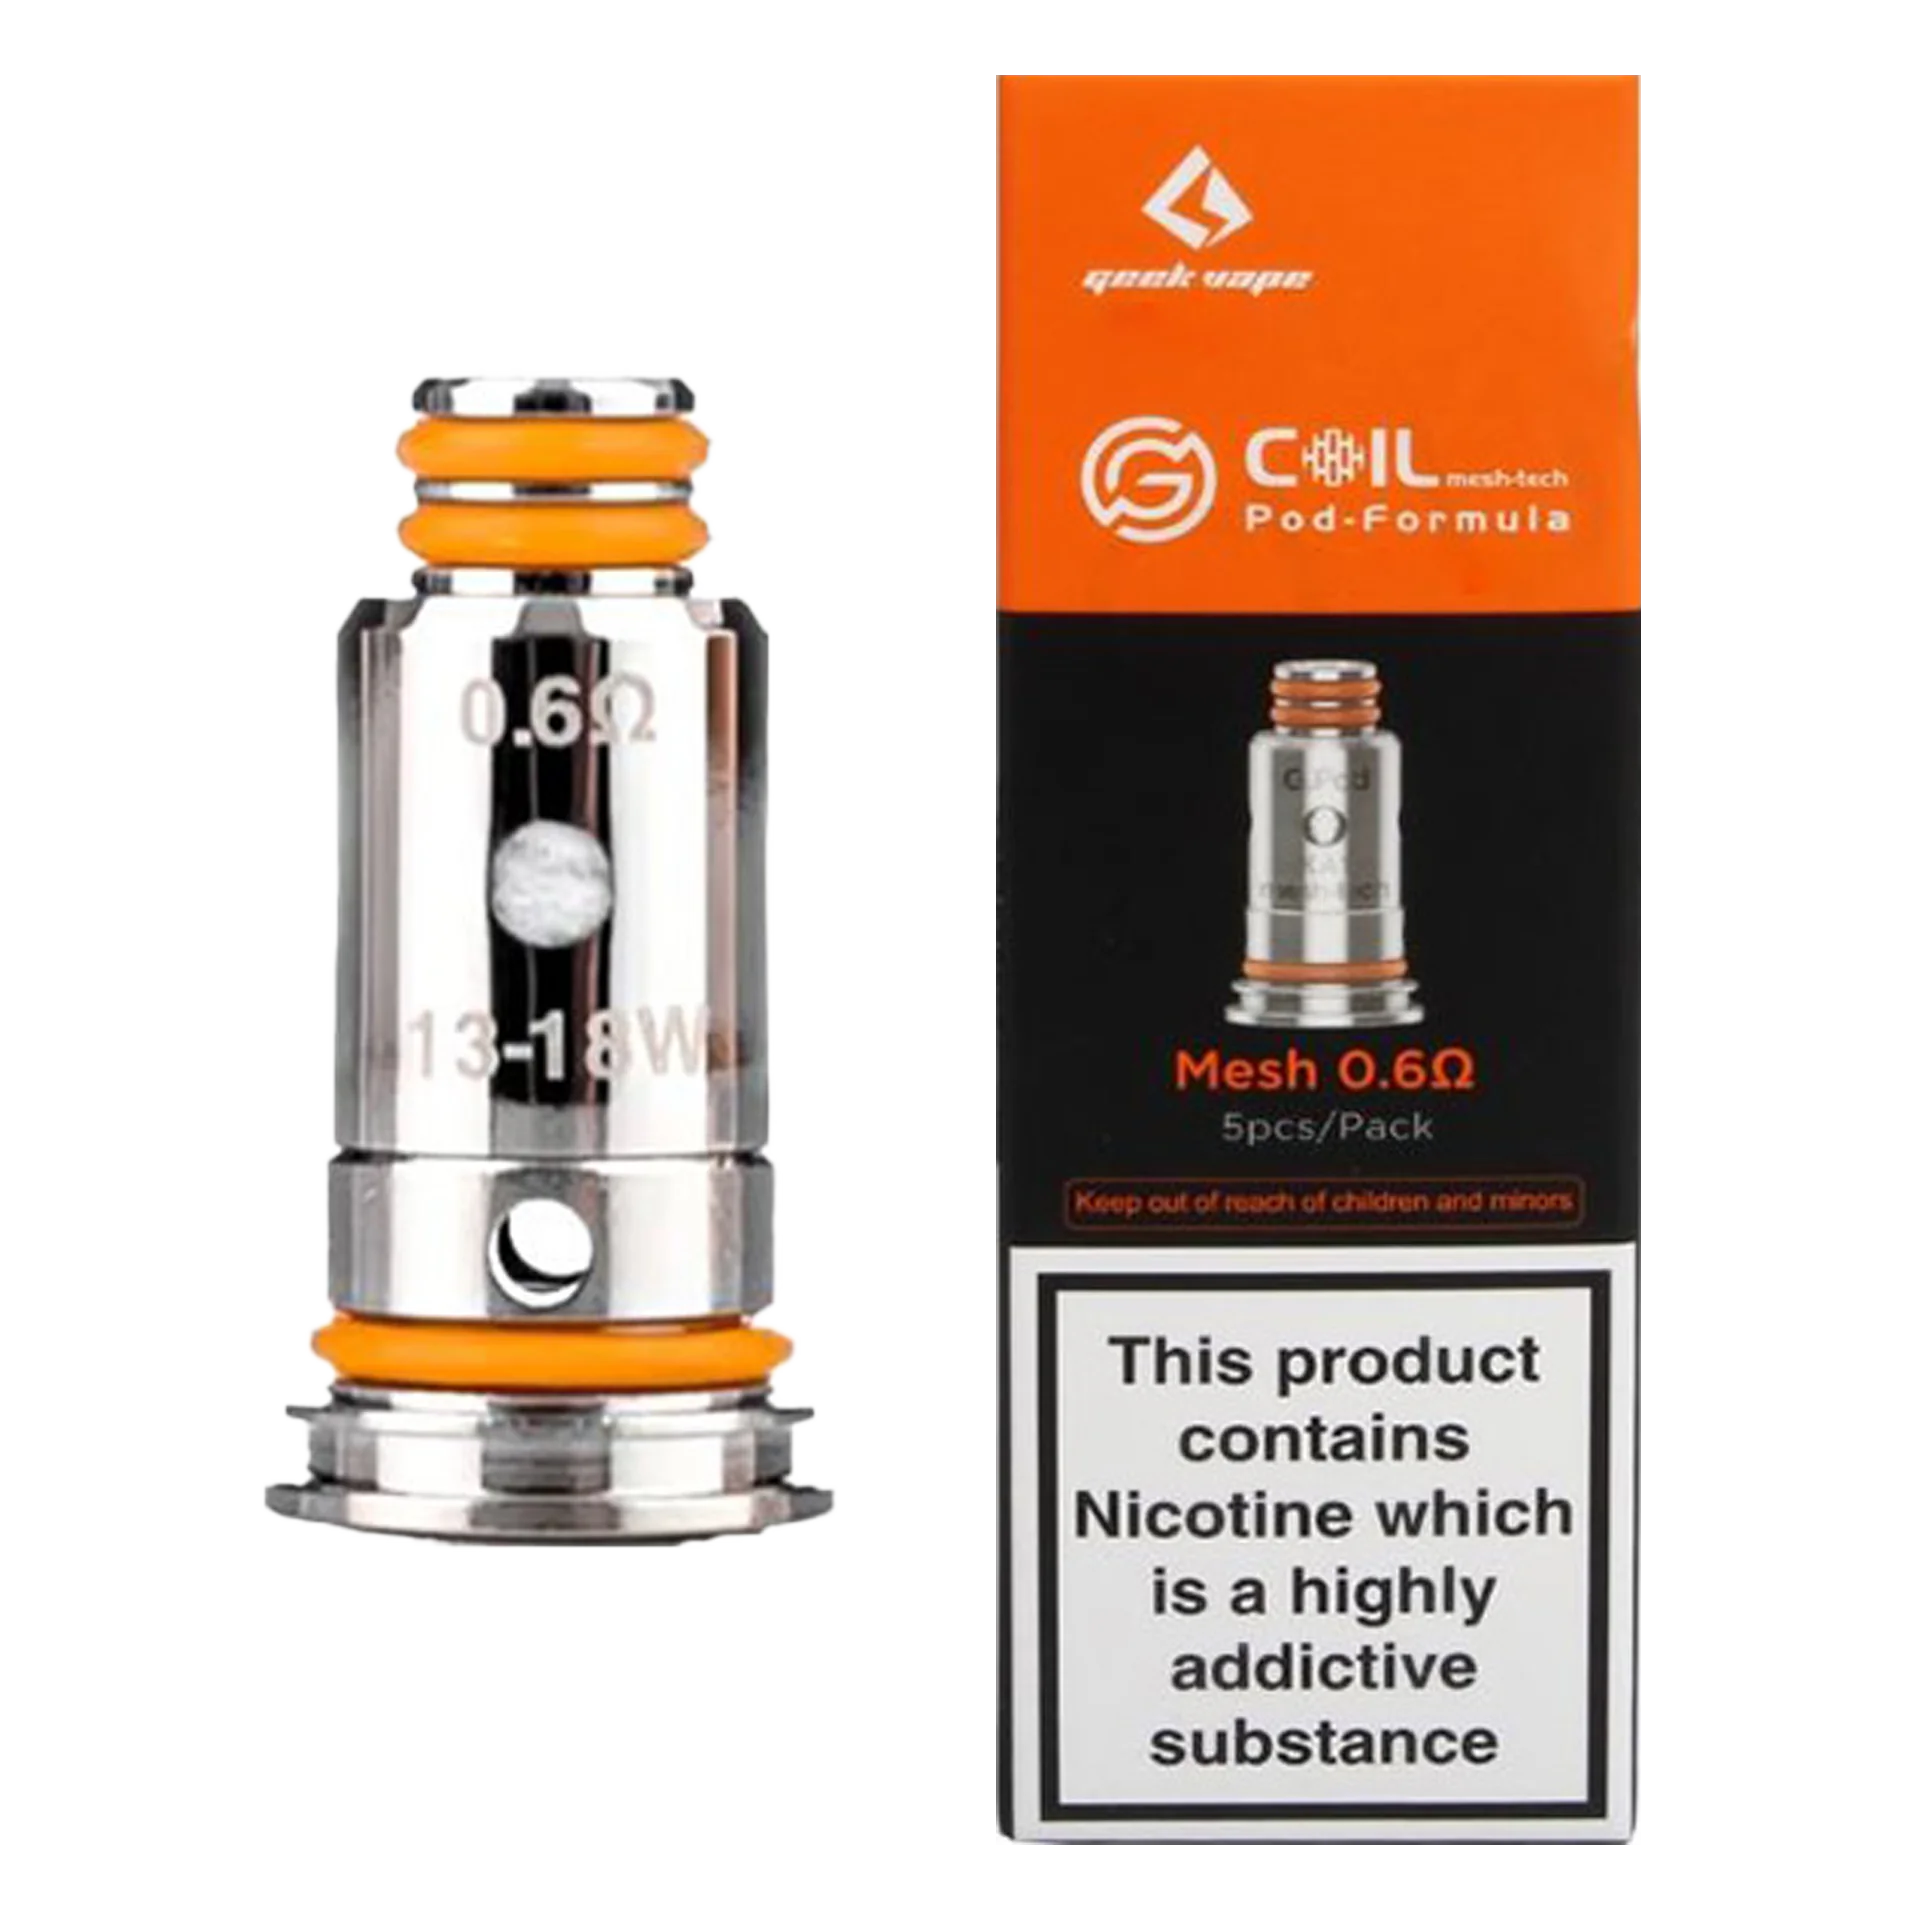 GeekVape G Coil Replacement Coils copy